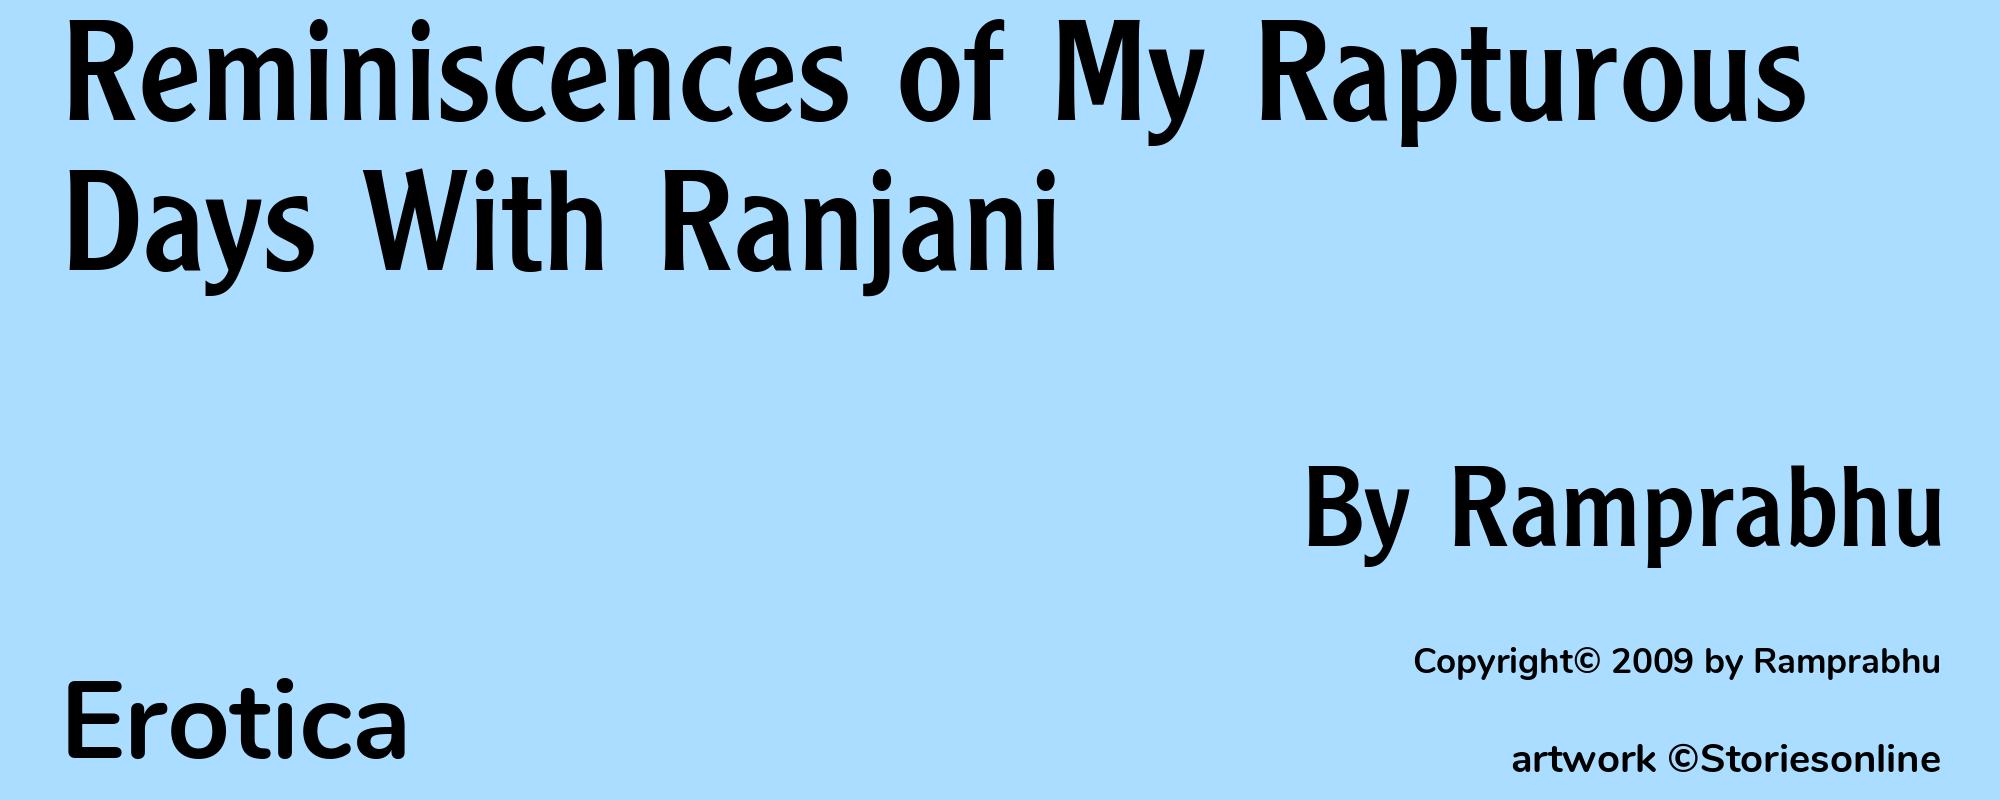 Reminiscences of My Rapturous Days With Ranjani - Cover